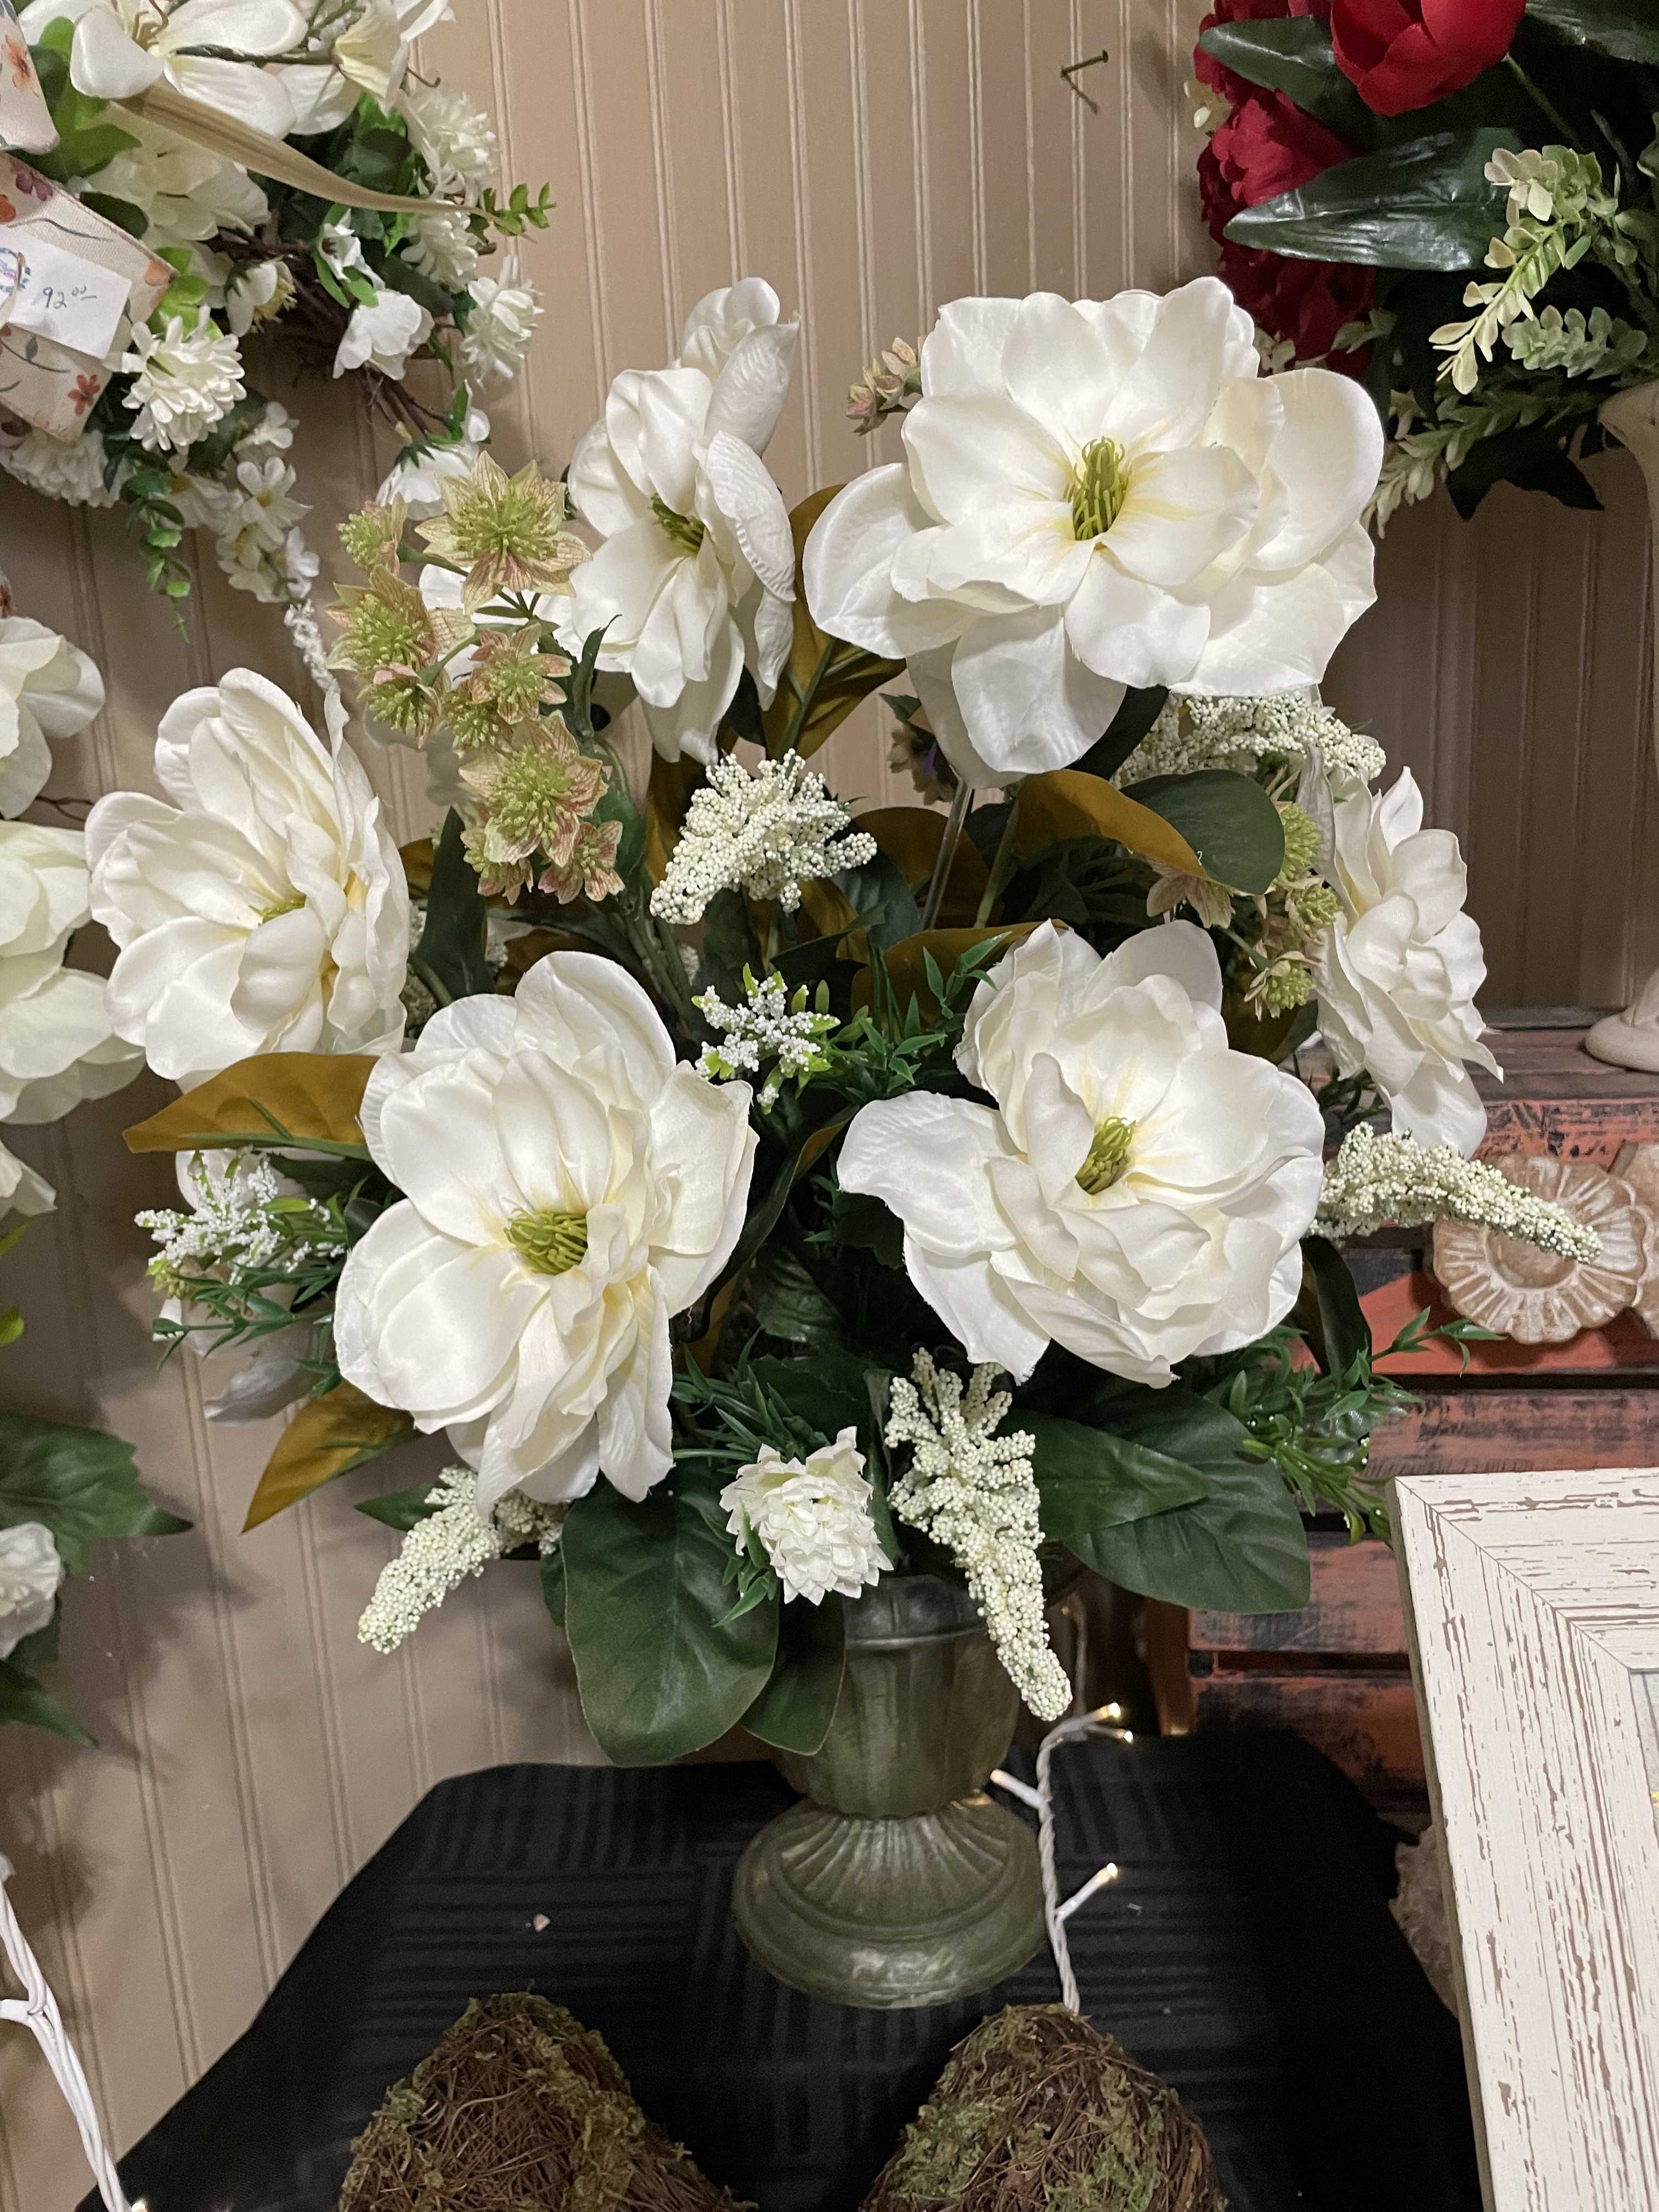 Magnolia Silk Bouquet - Silk magnolia flowers in Shades of off white are so pretty in this lovely farmhouse urn. 